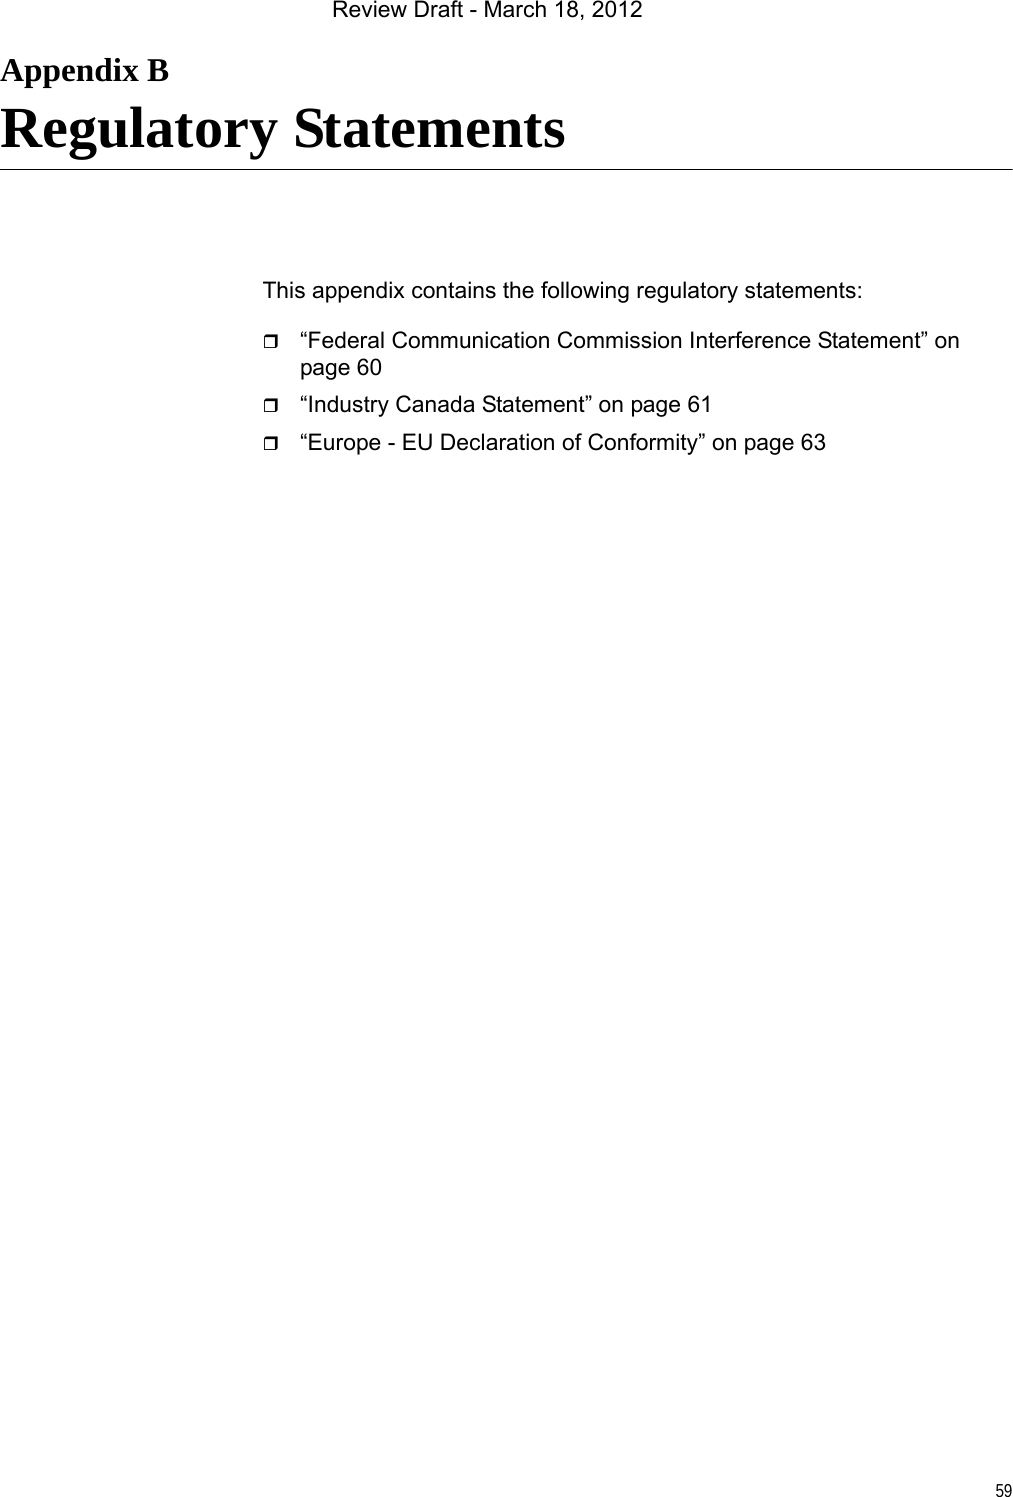 59Appendix BRegulatory StatementsThis appendix contains the following regulatory statements:“Federal Communication Commission Interference Statement” on page 60“Industry Canada Statement” on page 61“Europe - EU Declaration of Conformity” on page 63Review Draft - March 18, 2012